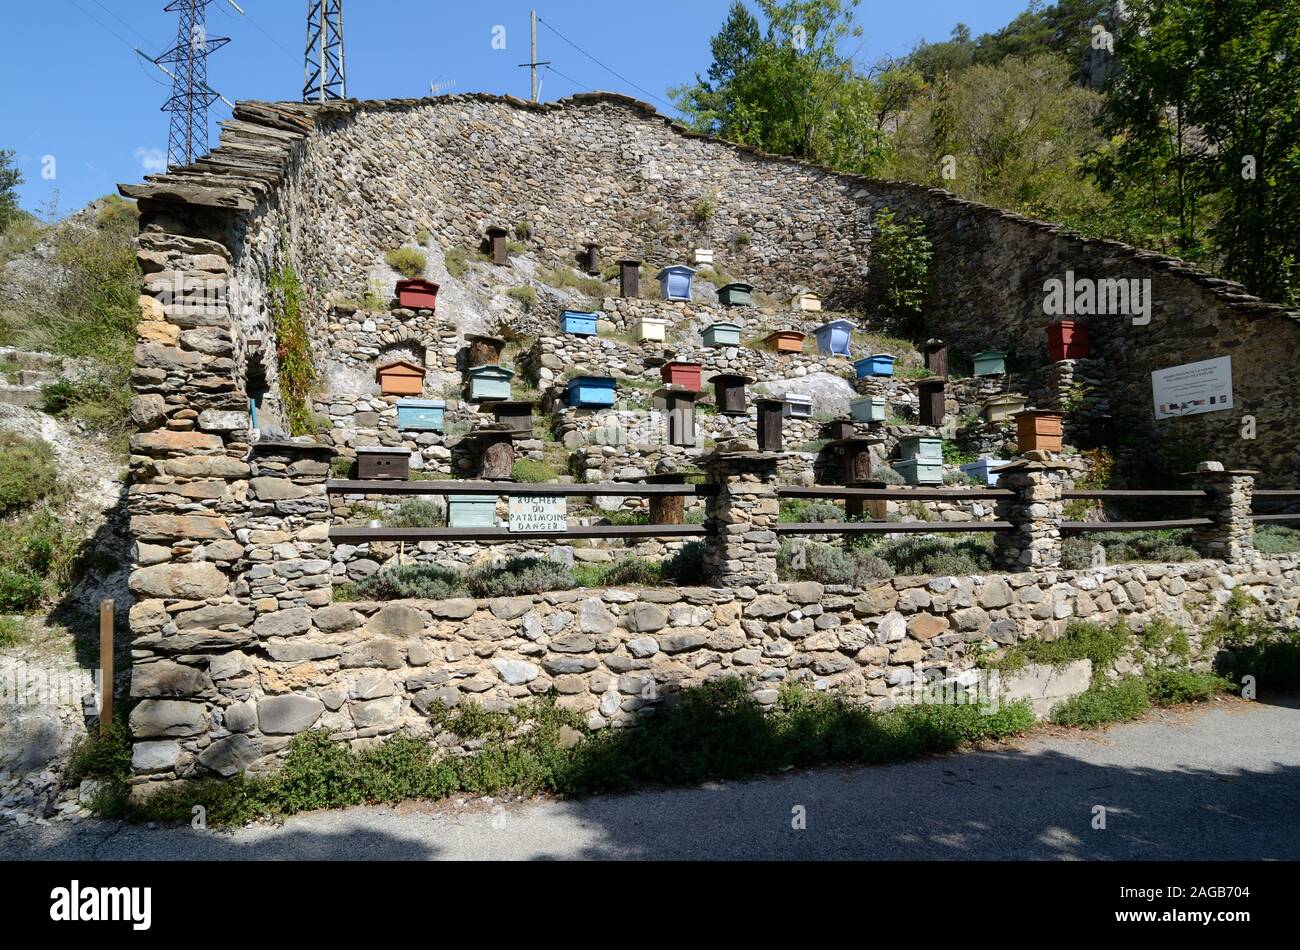 Different Models of Beehives in a Walled Apiary or Apiary Surrounded by Dry Stone Wall at La Brigue in the Roya Valley Alpes-Maritimes France Stock Photo